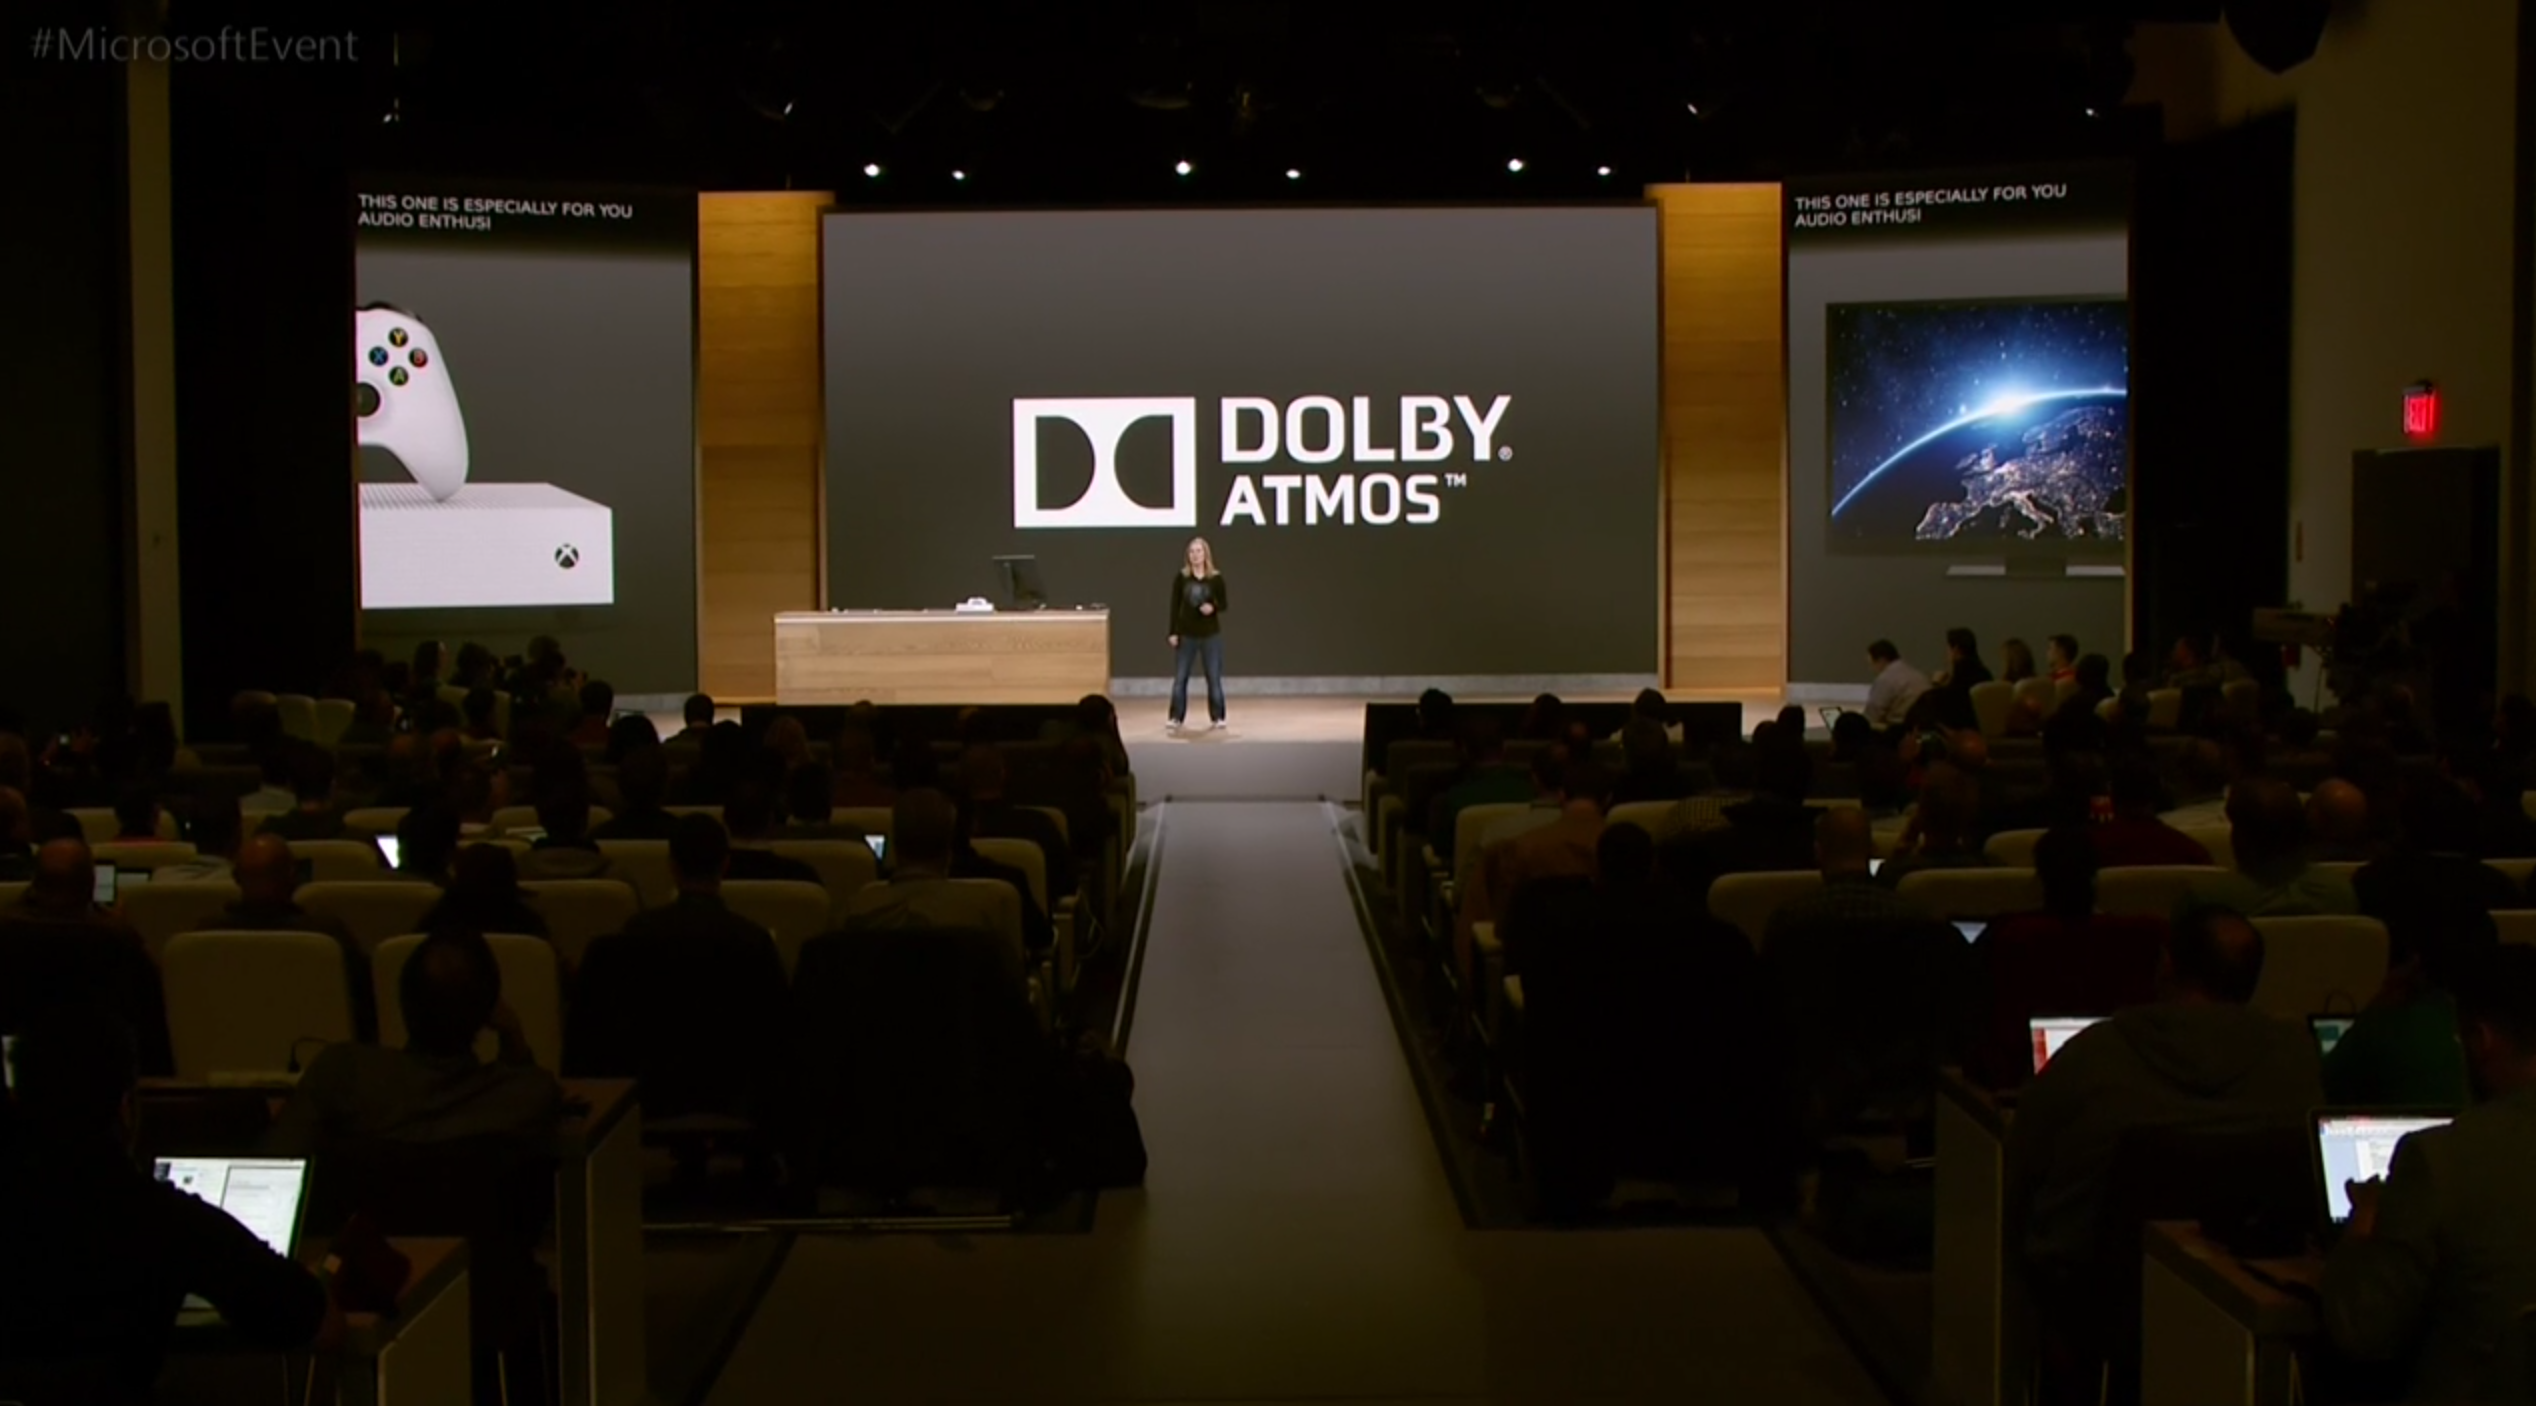 microsoft introduces dolby atmos support for xbox one image 1